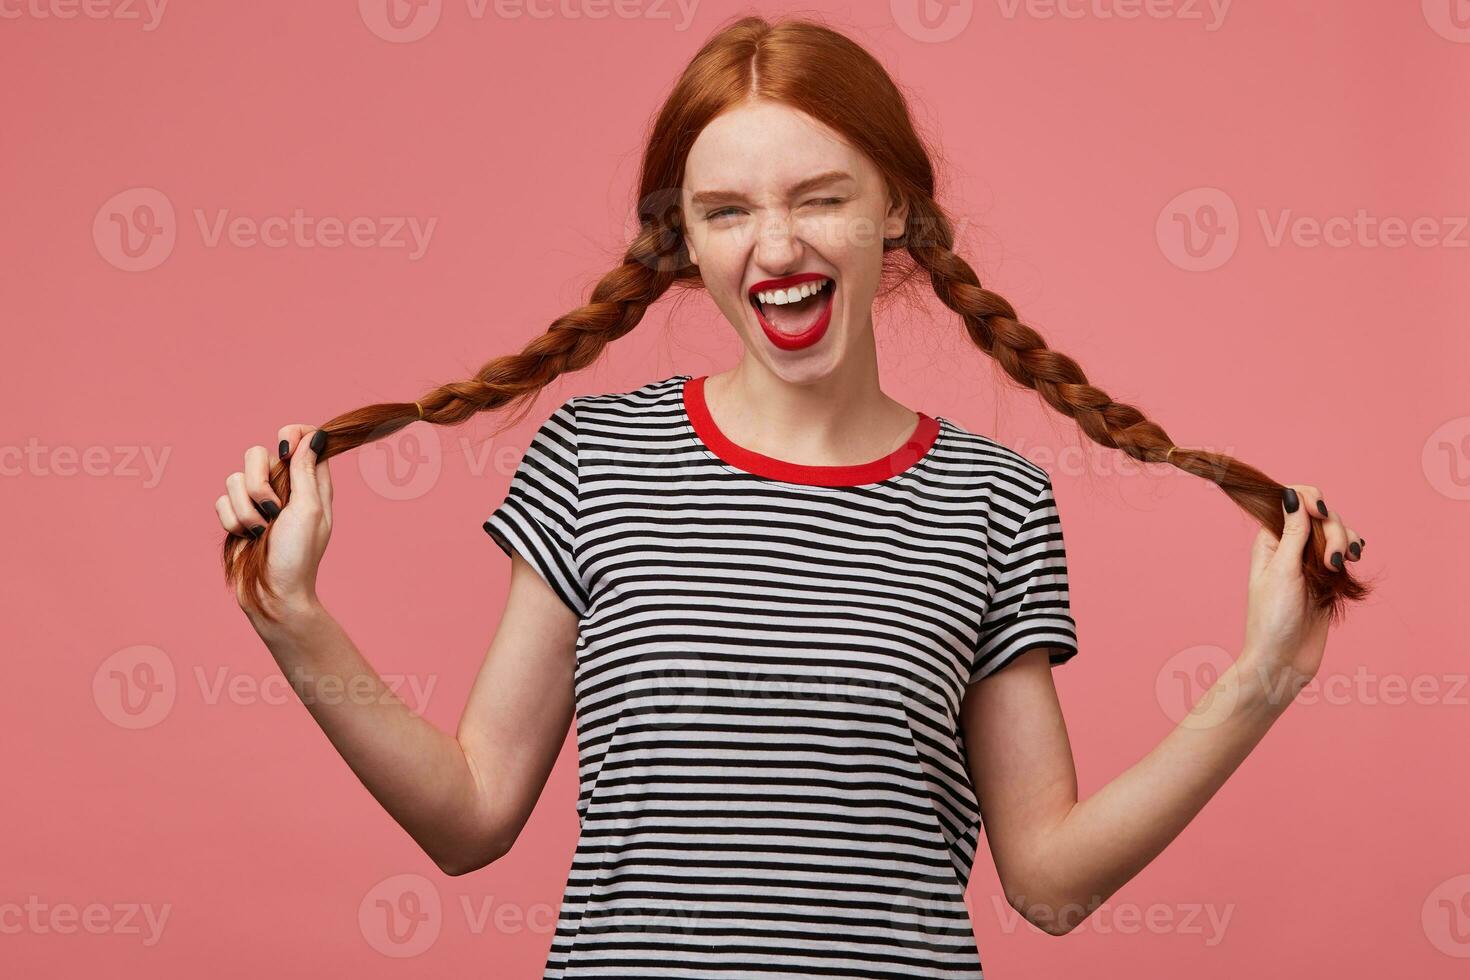 Funny joyful girl holding two red haired braids in hands, with red lips, dressed in stripped t-shirt, dressed in stripped t-shirt, winks happy playfully looking camera isolated on a pink background photo